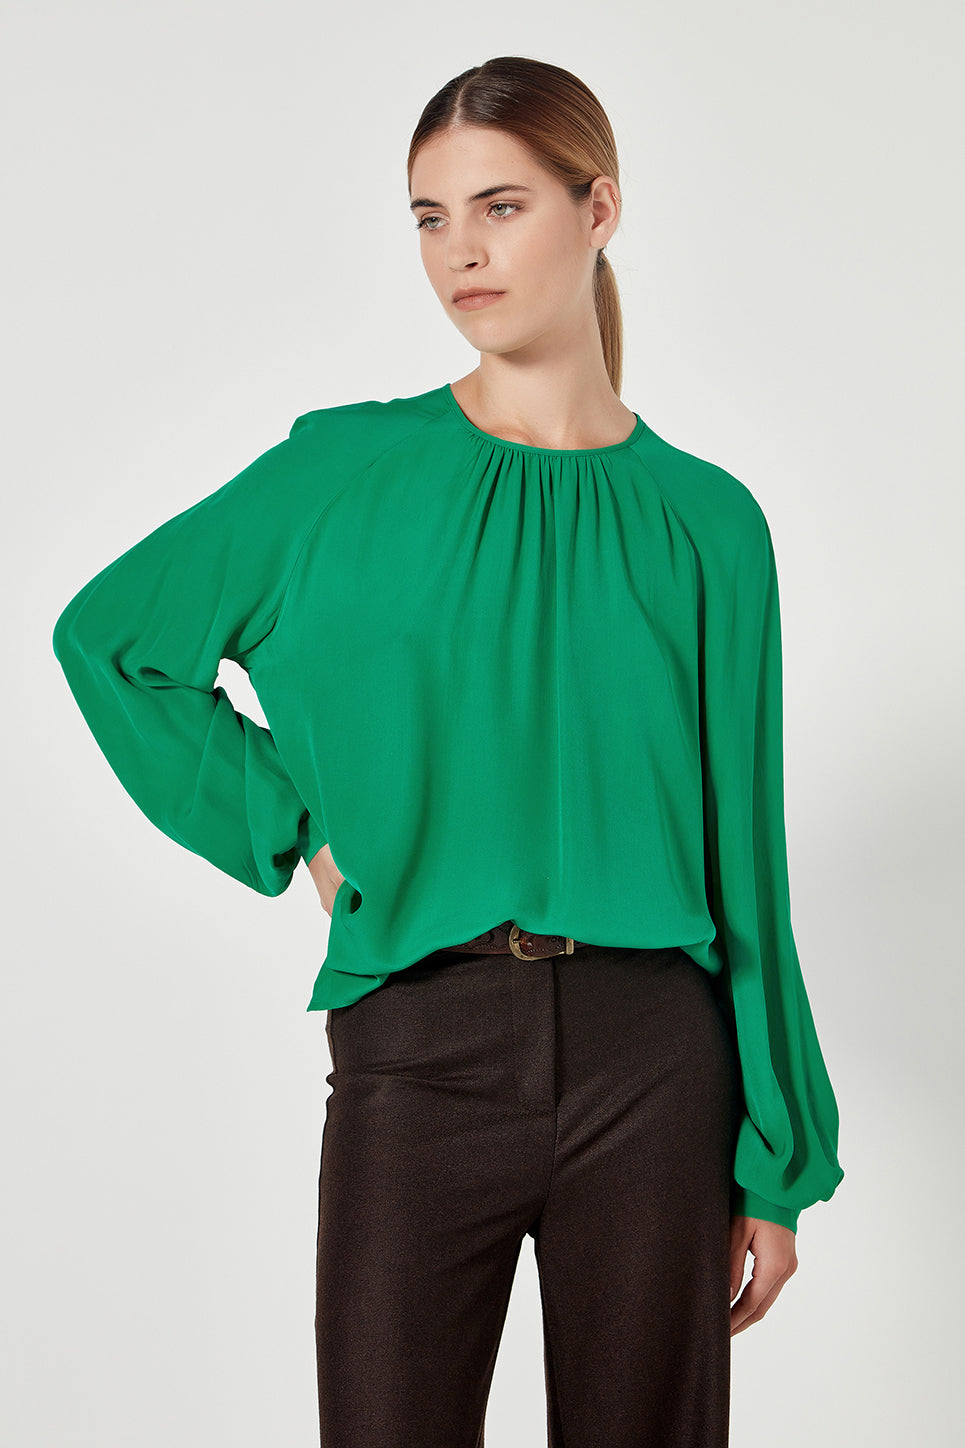 The Lisbon Top in Kelly Green